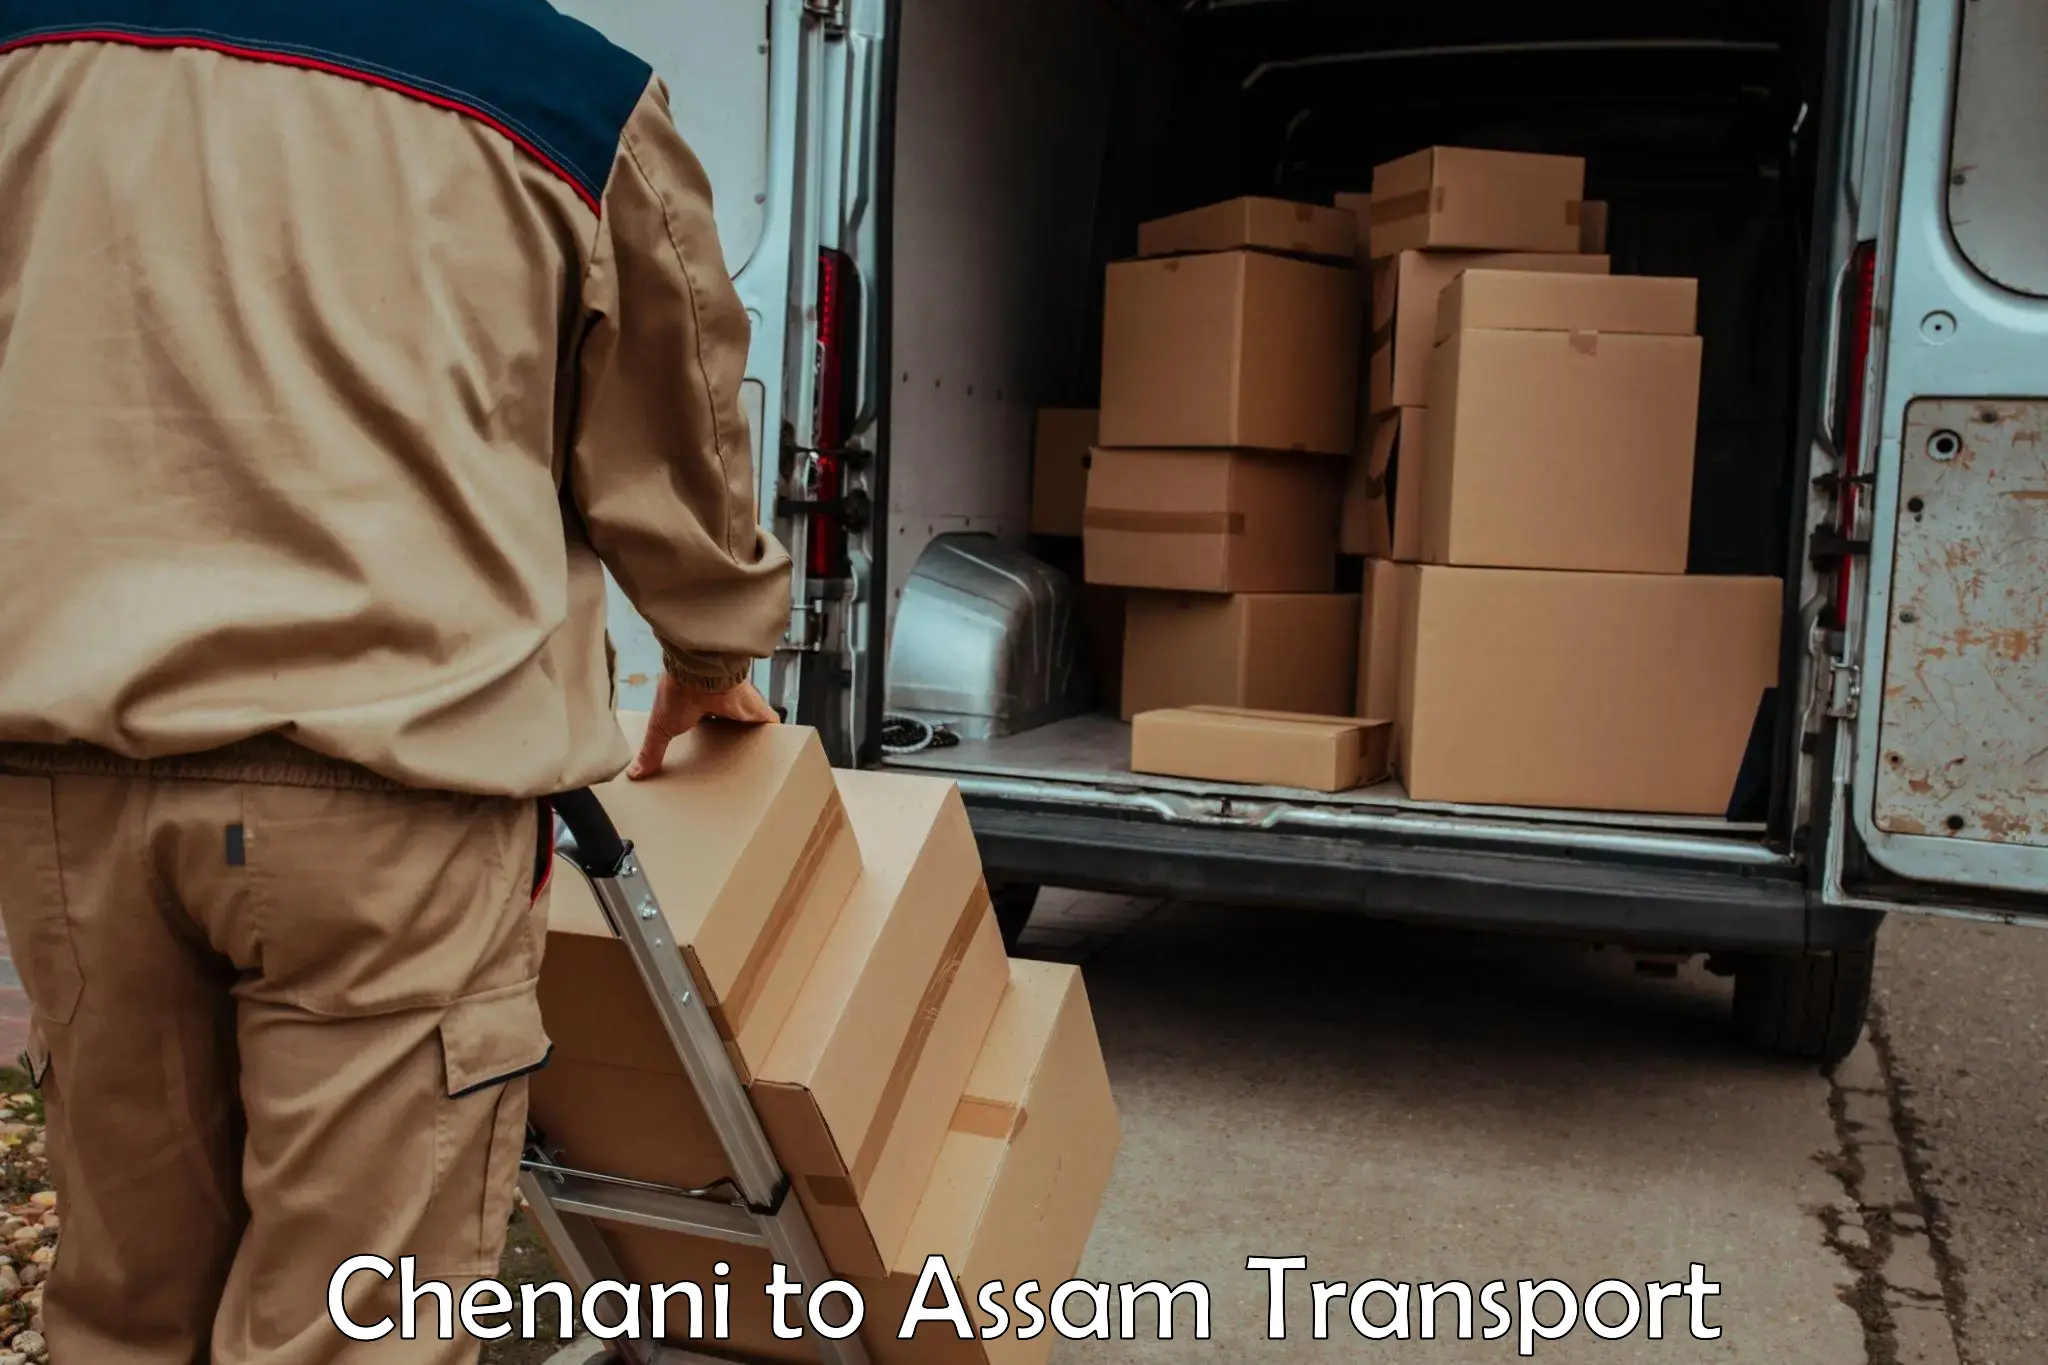 Pick up transport service in Chenani to Dhemaji